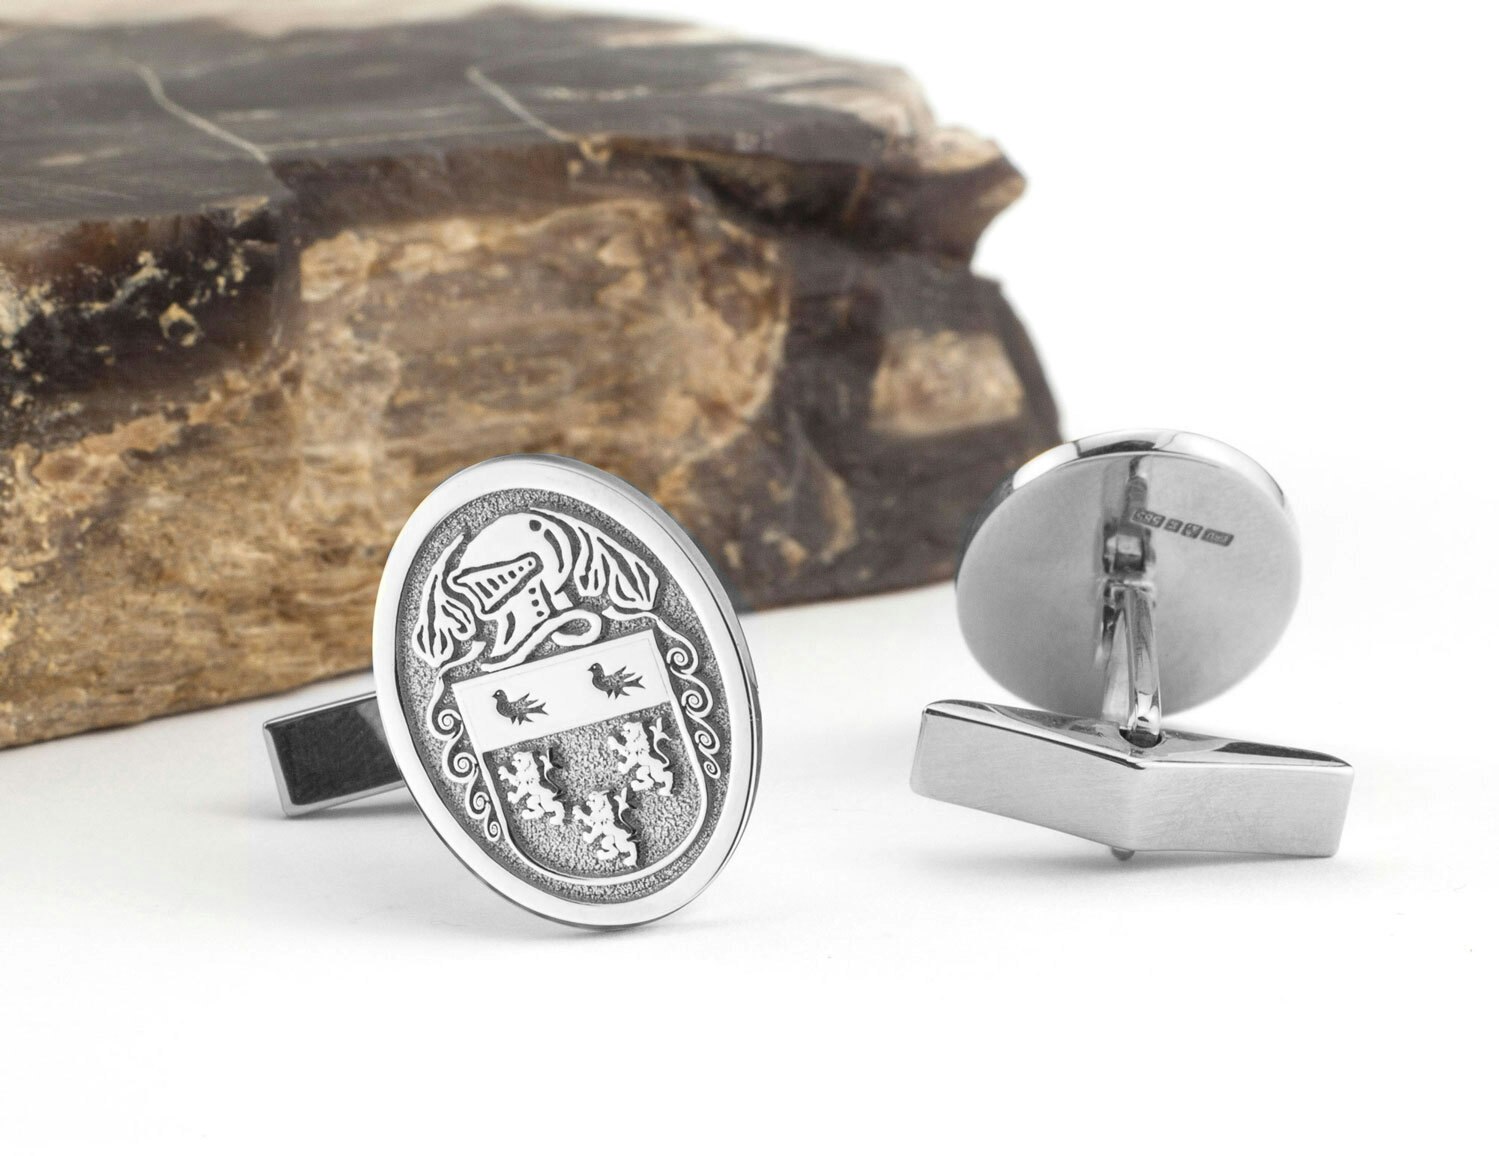 Select Gifts Rae Scotland Family Crest Surname Coat Of Arms Gold Cufflinks Engraved Box 